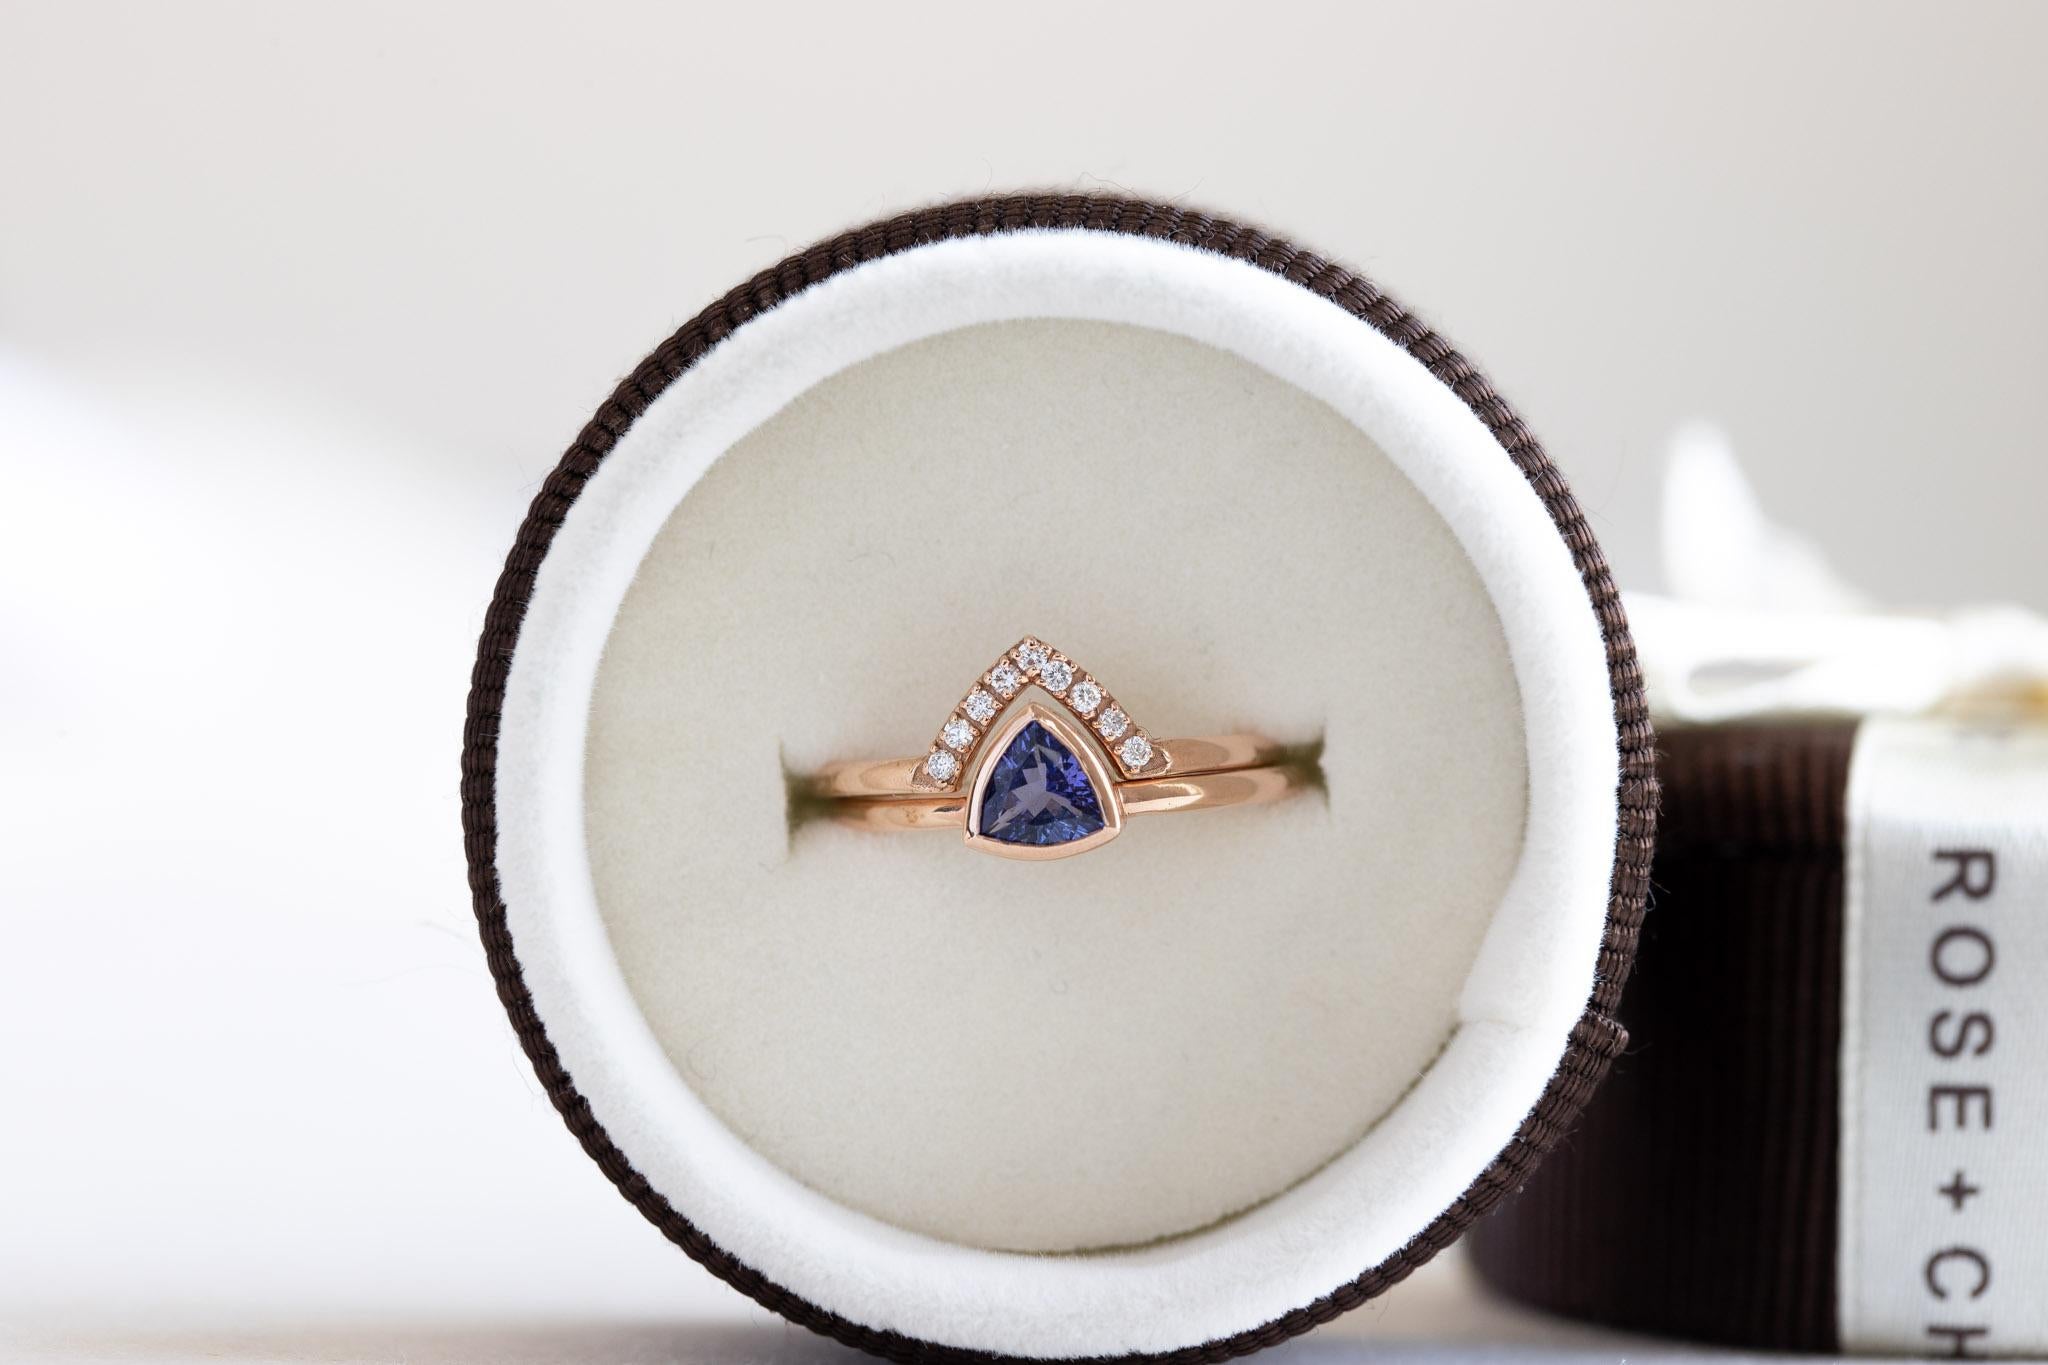 Trillion cut natural tanzanite ring stacked with diamonds chevron ring guard.
Set of two rings
Stone weight: 0.450 carat tanzanite
14k Solid rose gold fully hallmarked.
Stone Size: 5mm X 5mm tanzanite
Trillion cut
Clarity: SI-GHI Diamonds
Nine 1.2mm